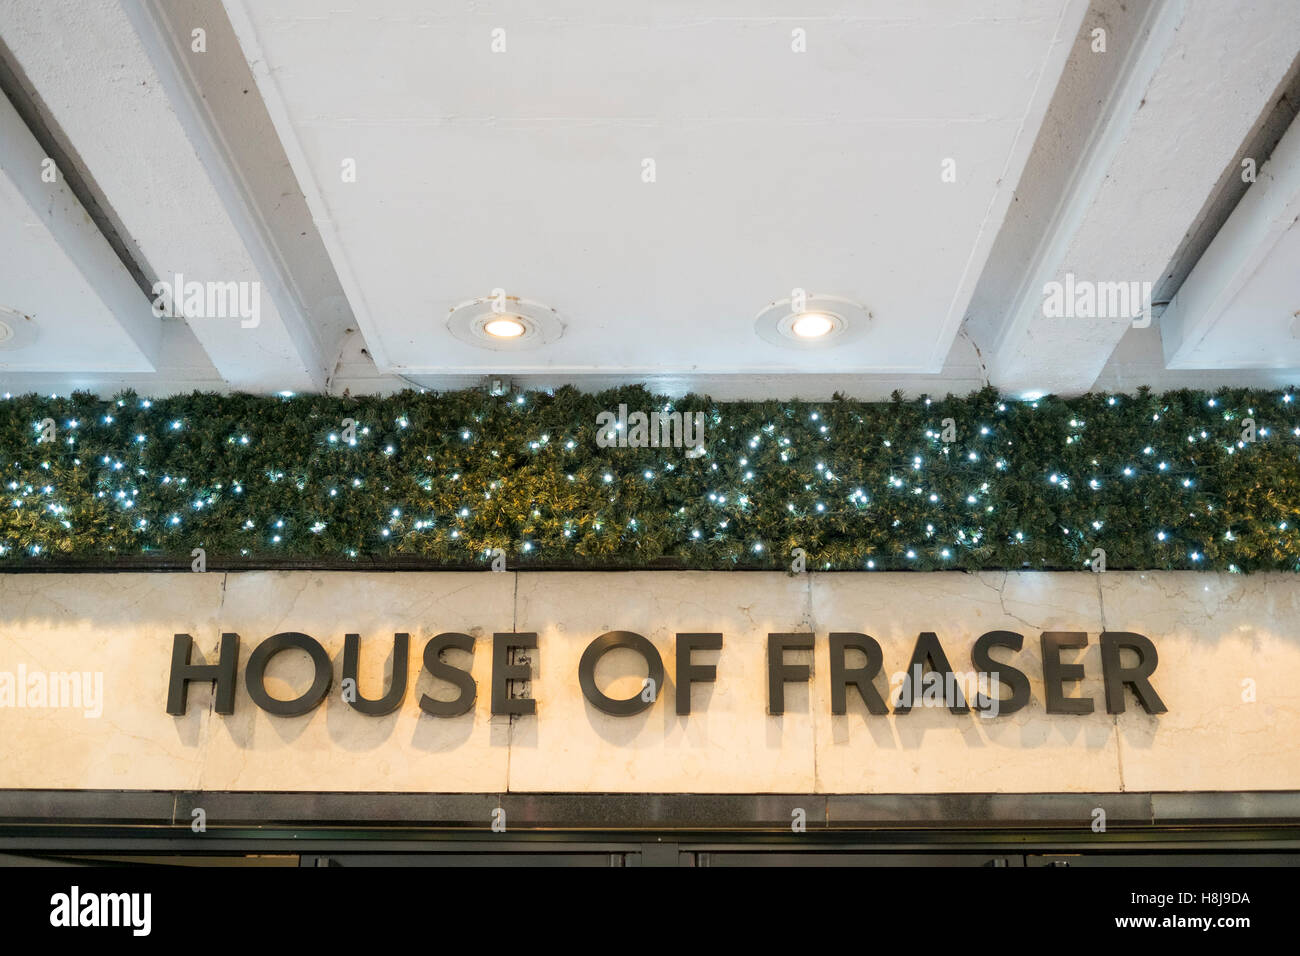 'House of Fraser' Christmas shop window display, Manchester, UK. Stock Photo